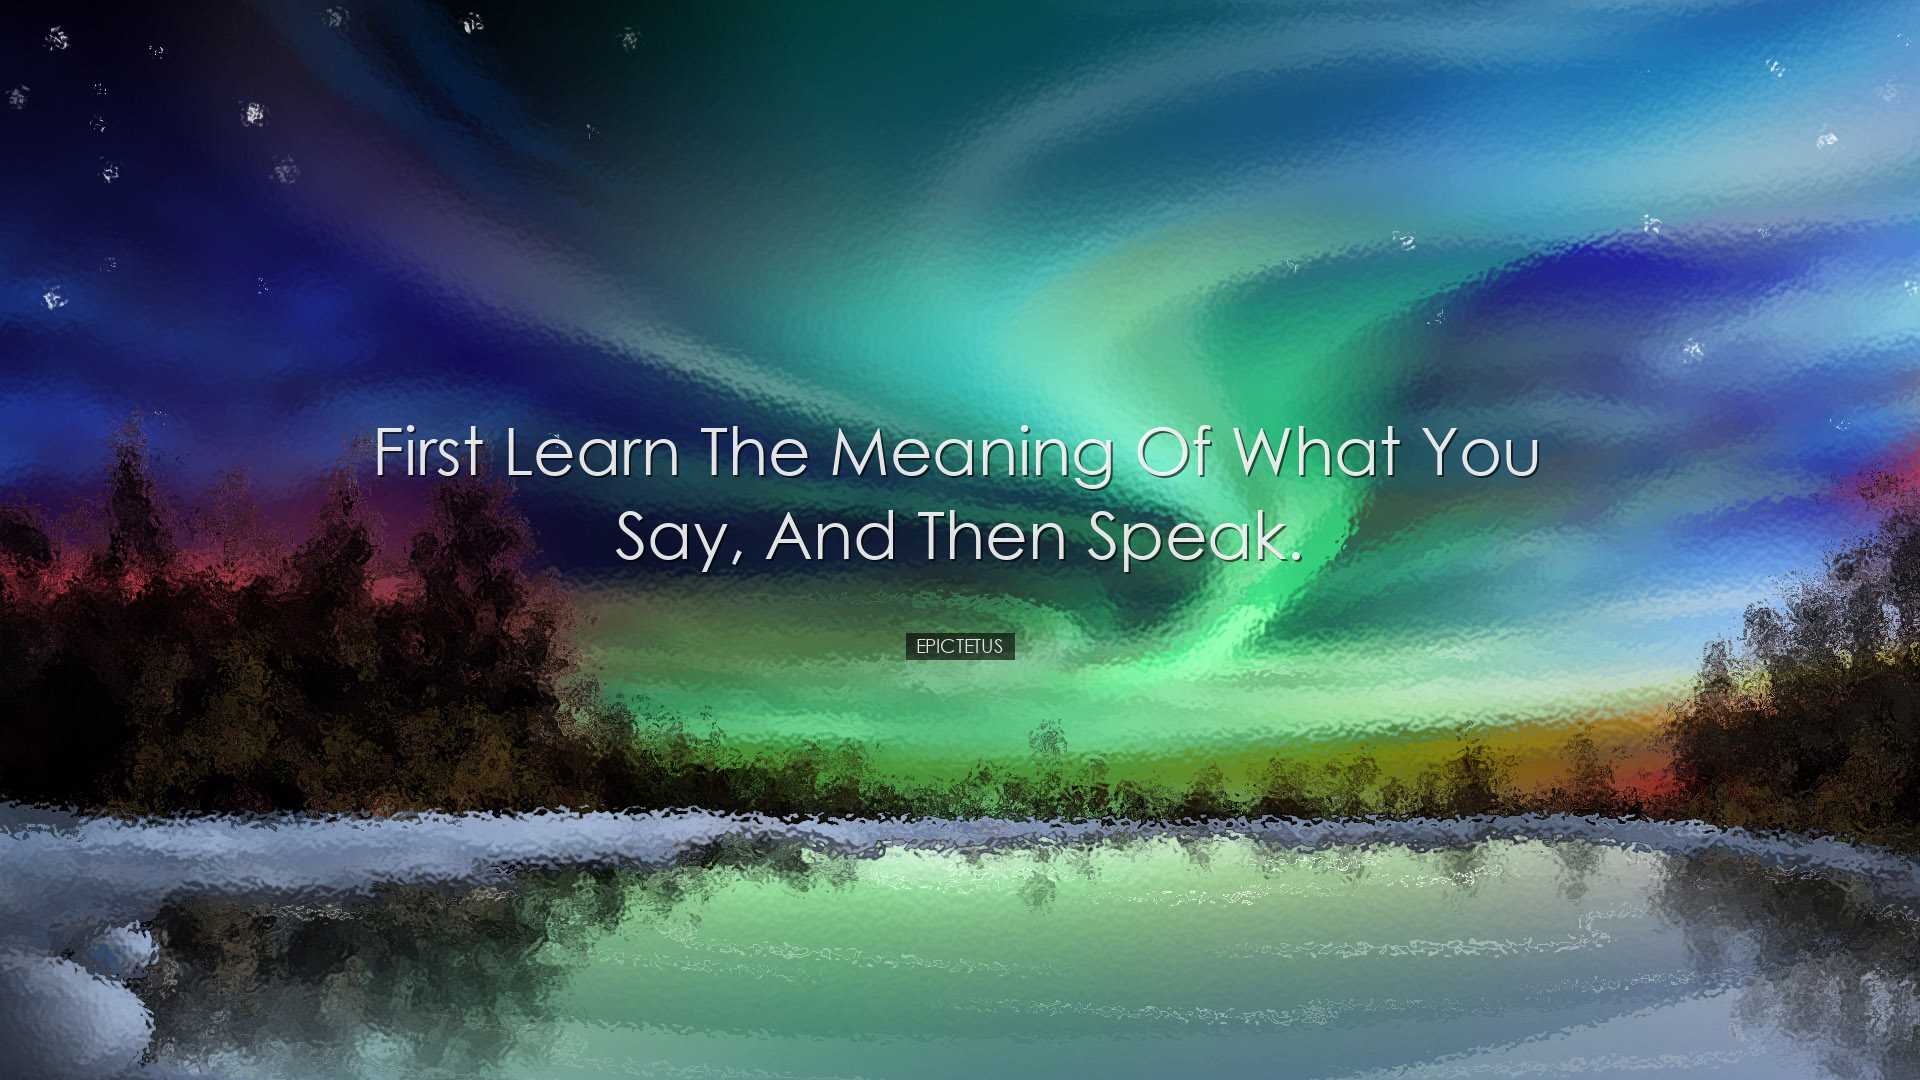 First learn the meaning of what you say, and then speak. - Epictet